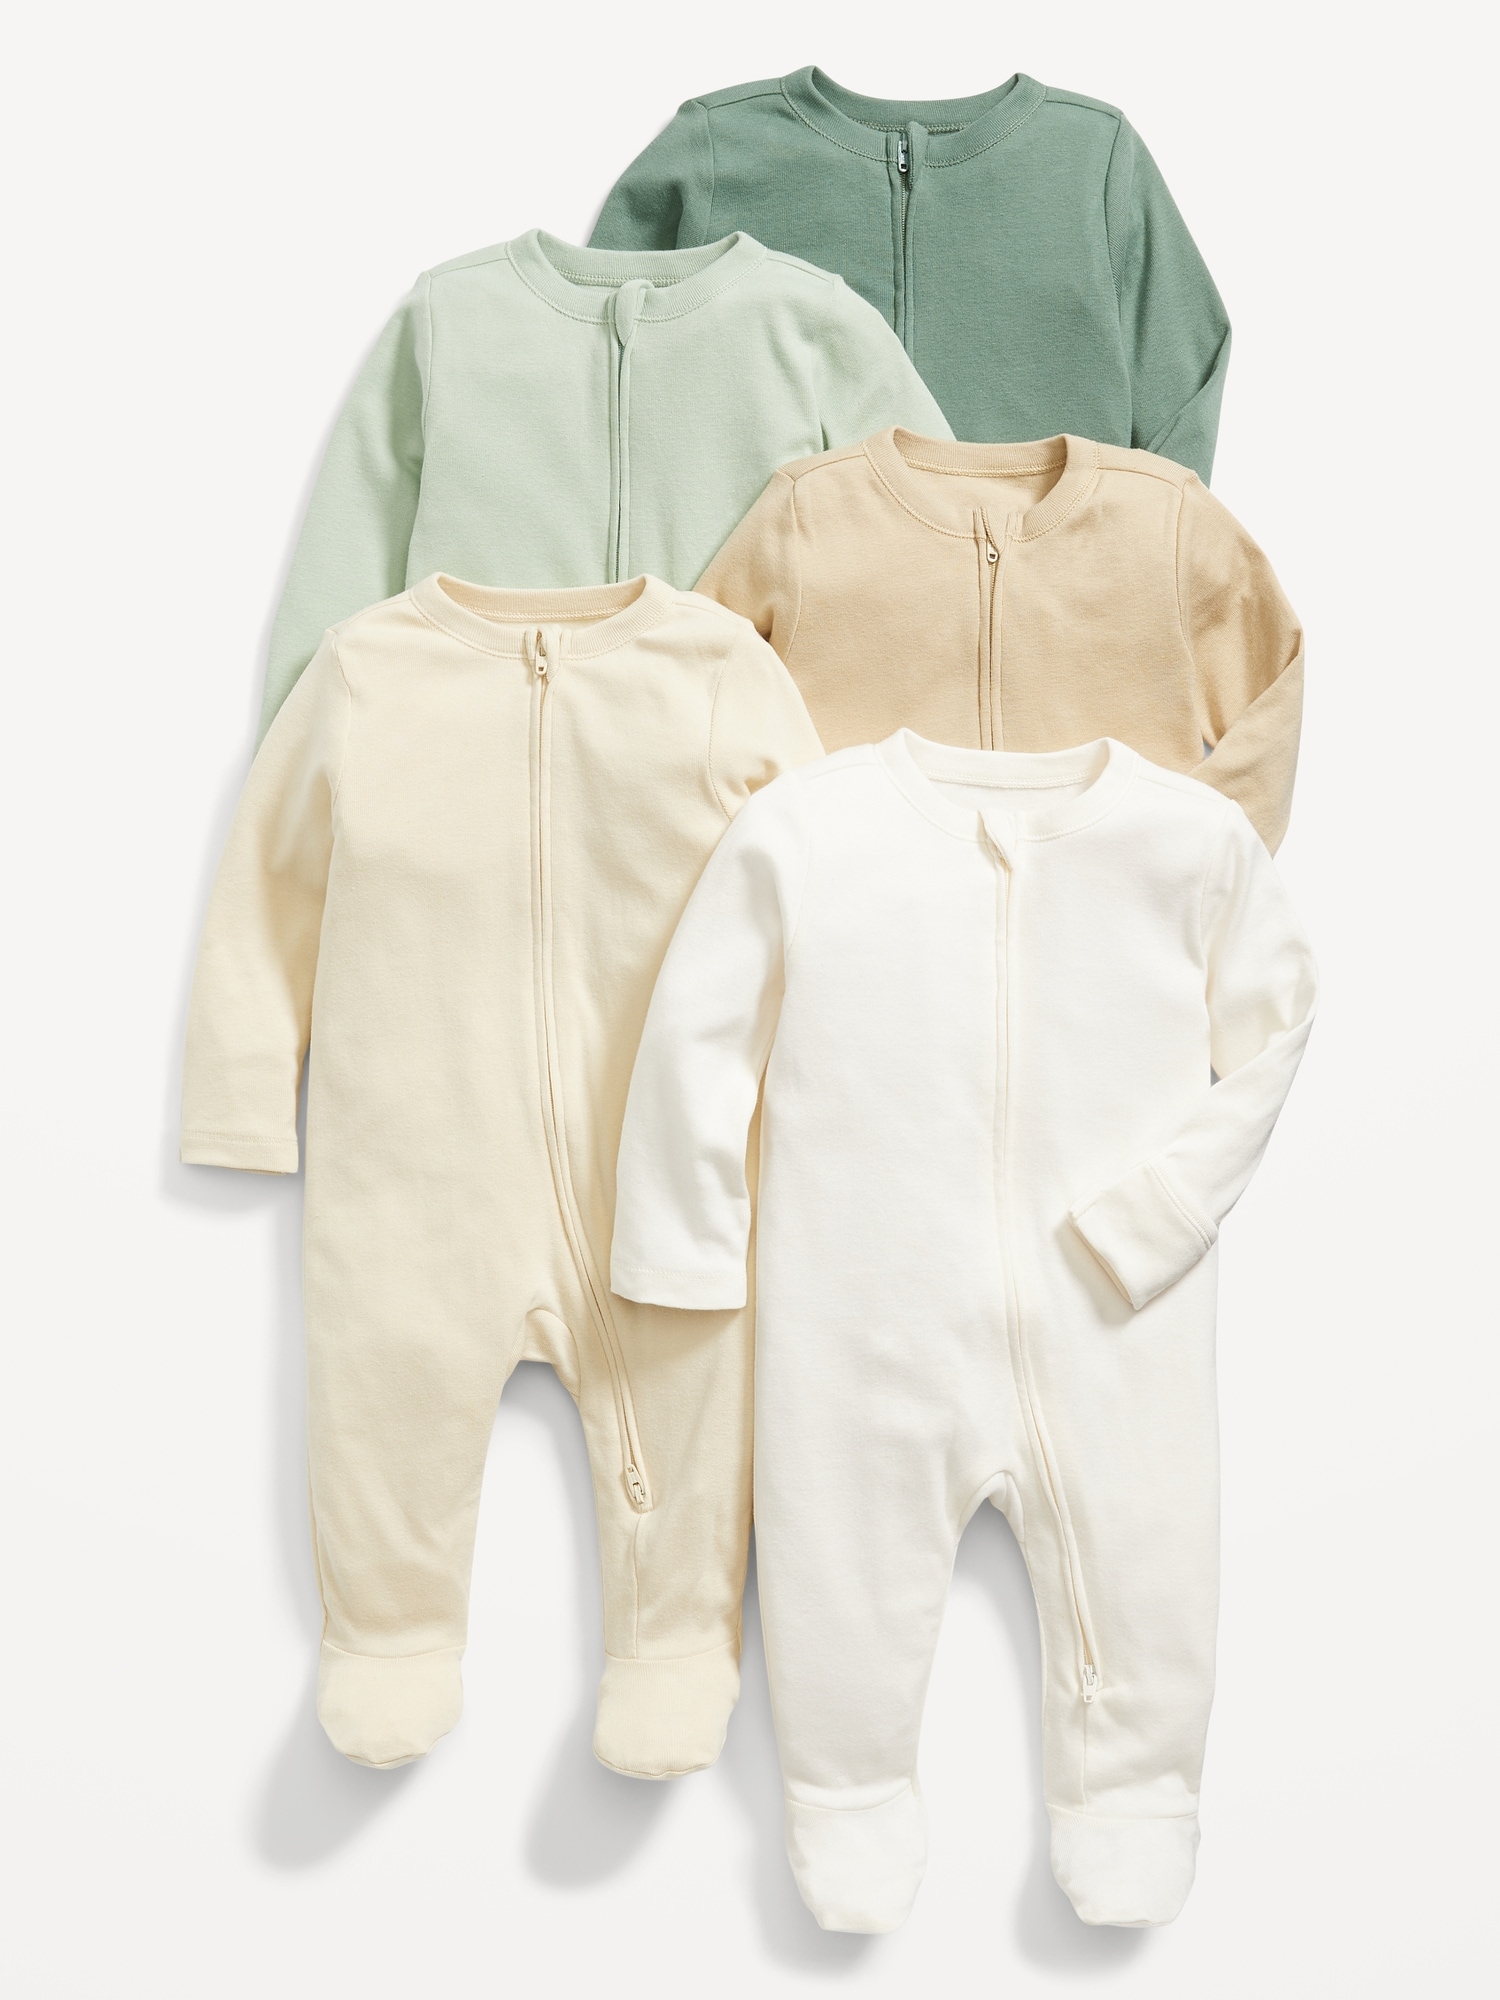 2-Way-Zip Sleep & Play One-Piece 5-Pack for Baby